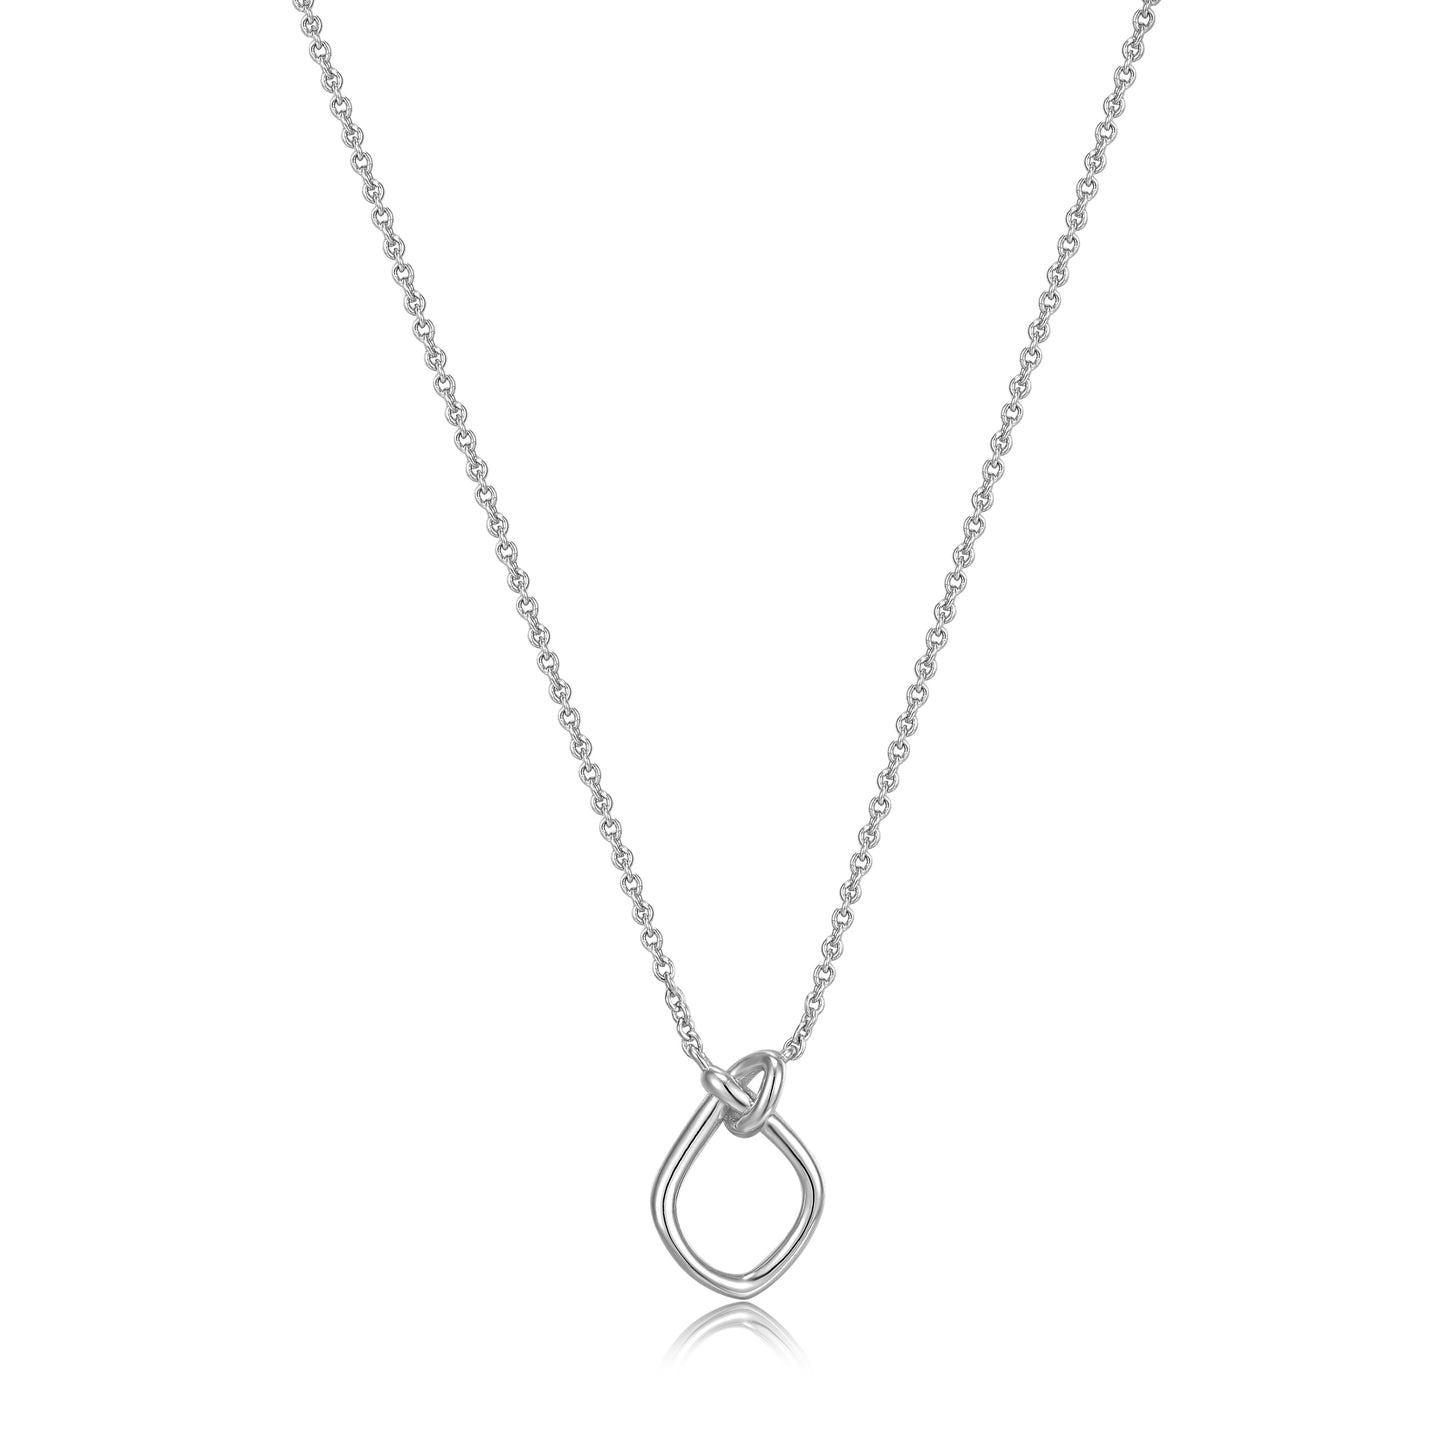 ANIA HAIE ANIA HAIE - Silver Knot Pendant Necklace available at The Good Life Boutique